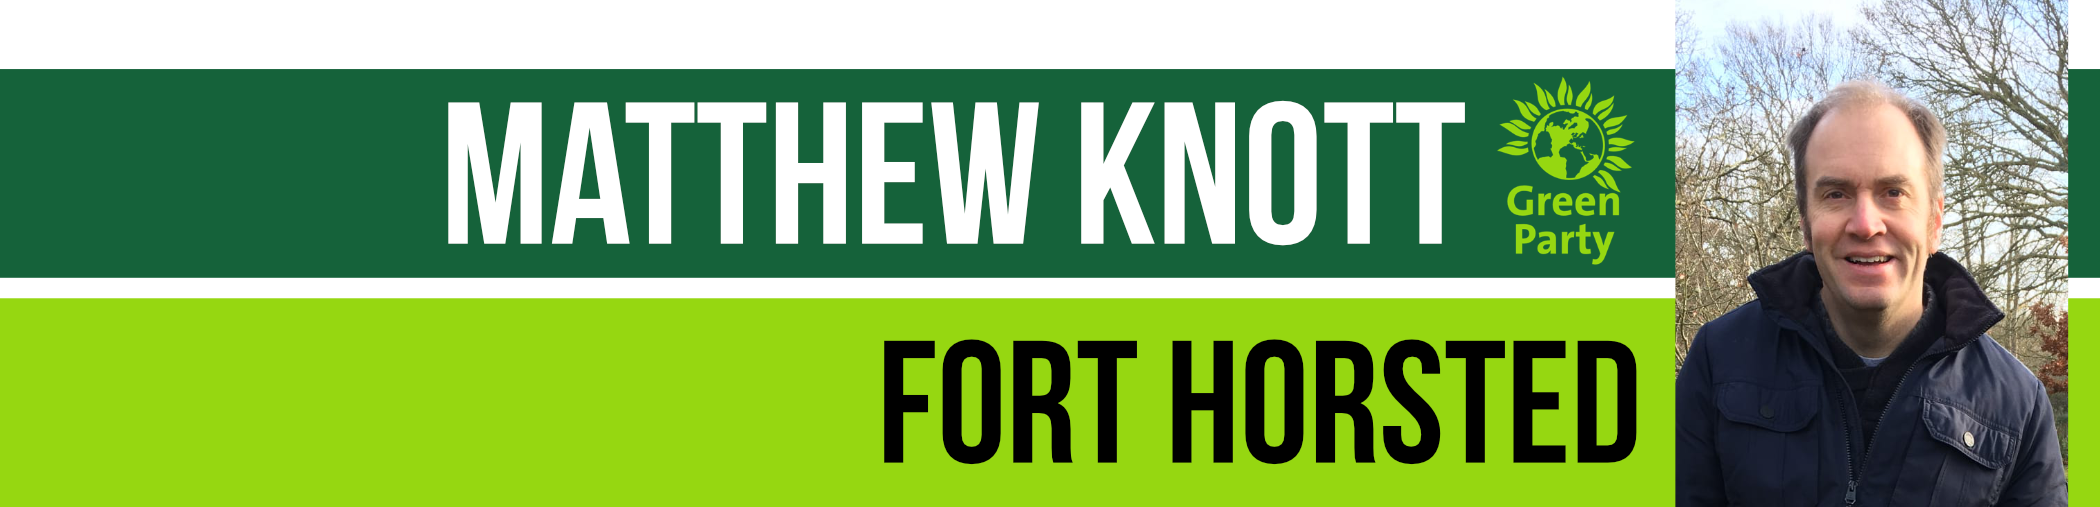 The Green Party candidate for Fort Horsted Matthew Knott Local May Elections 4th May